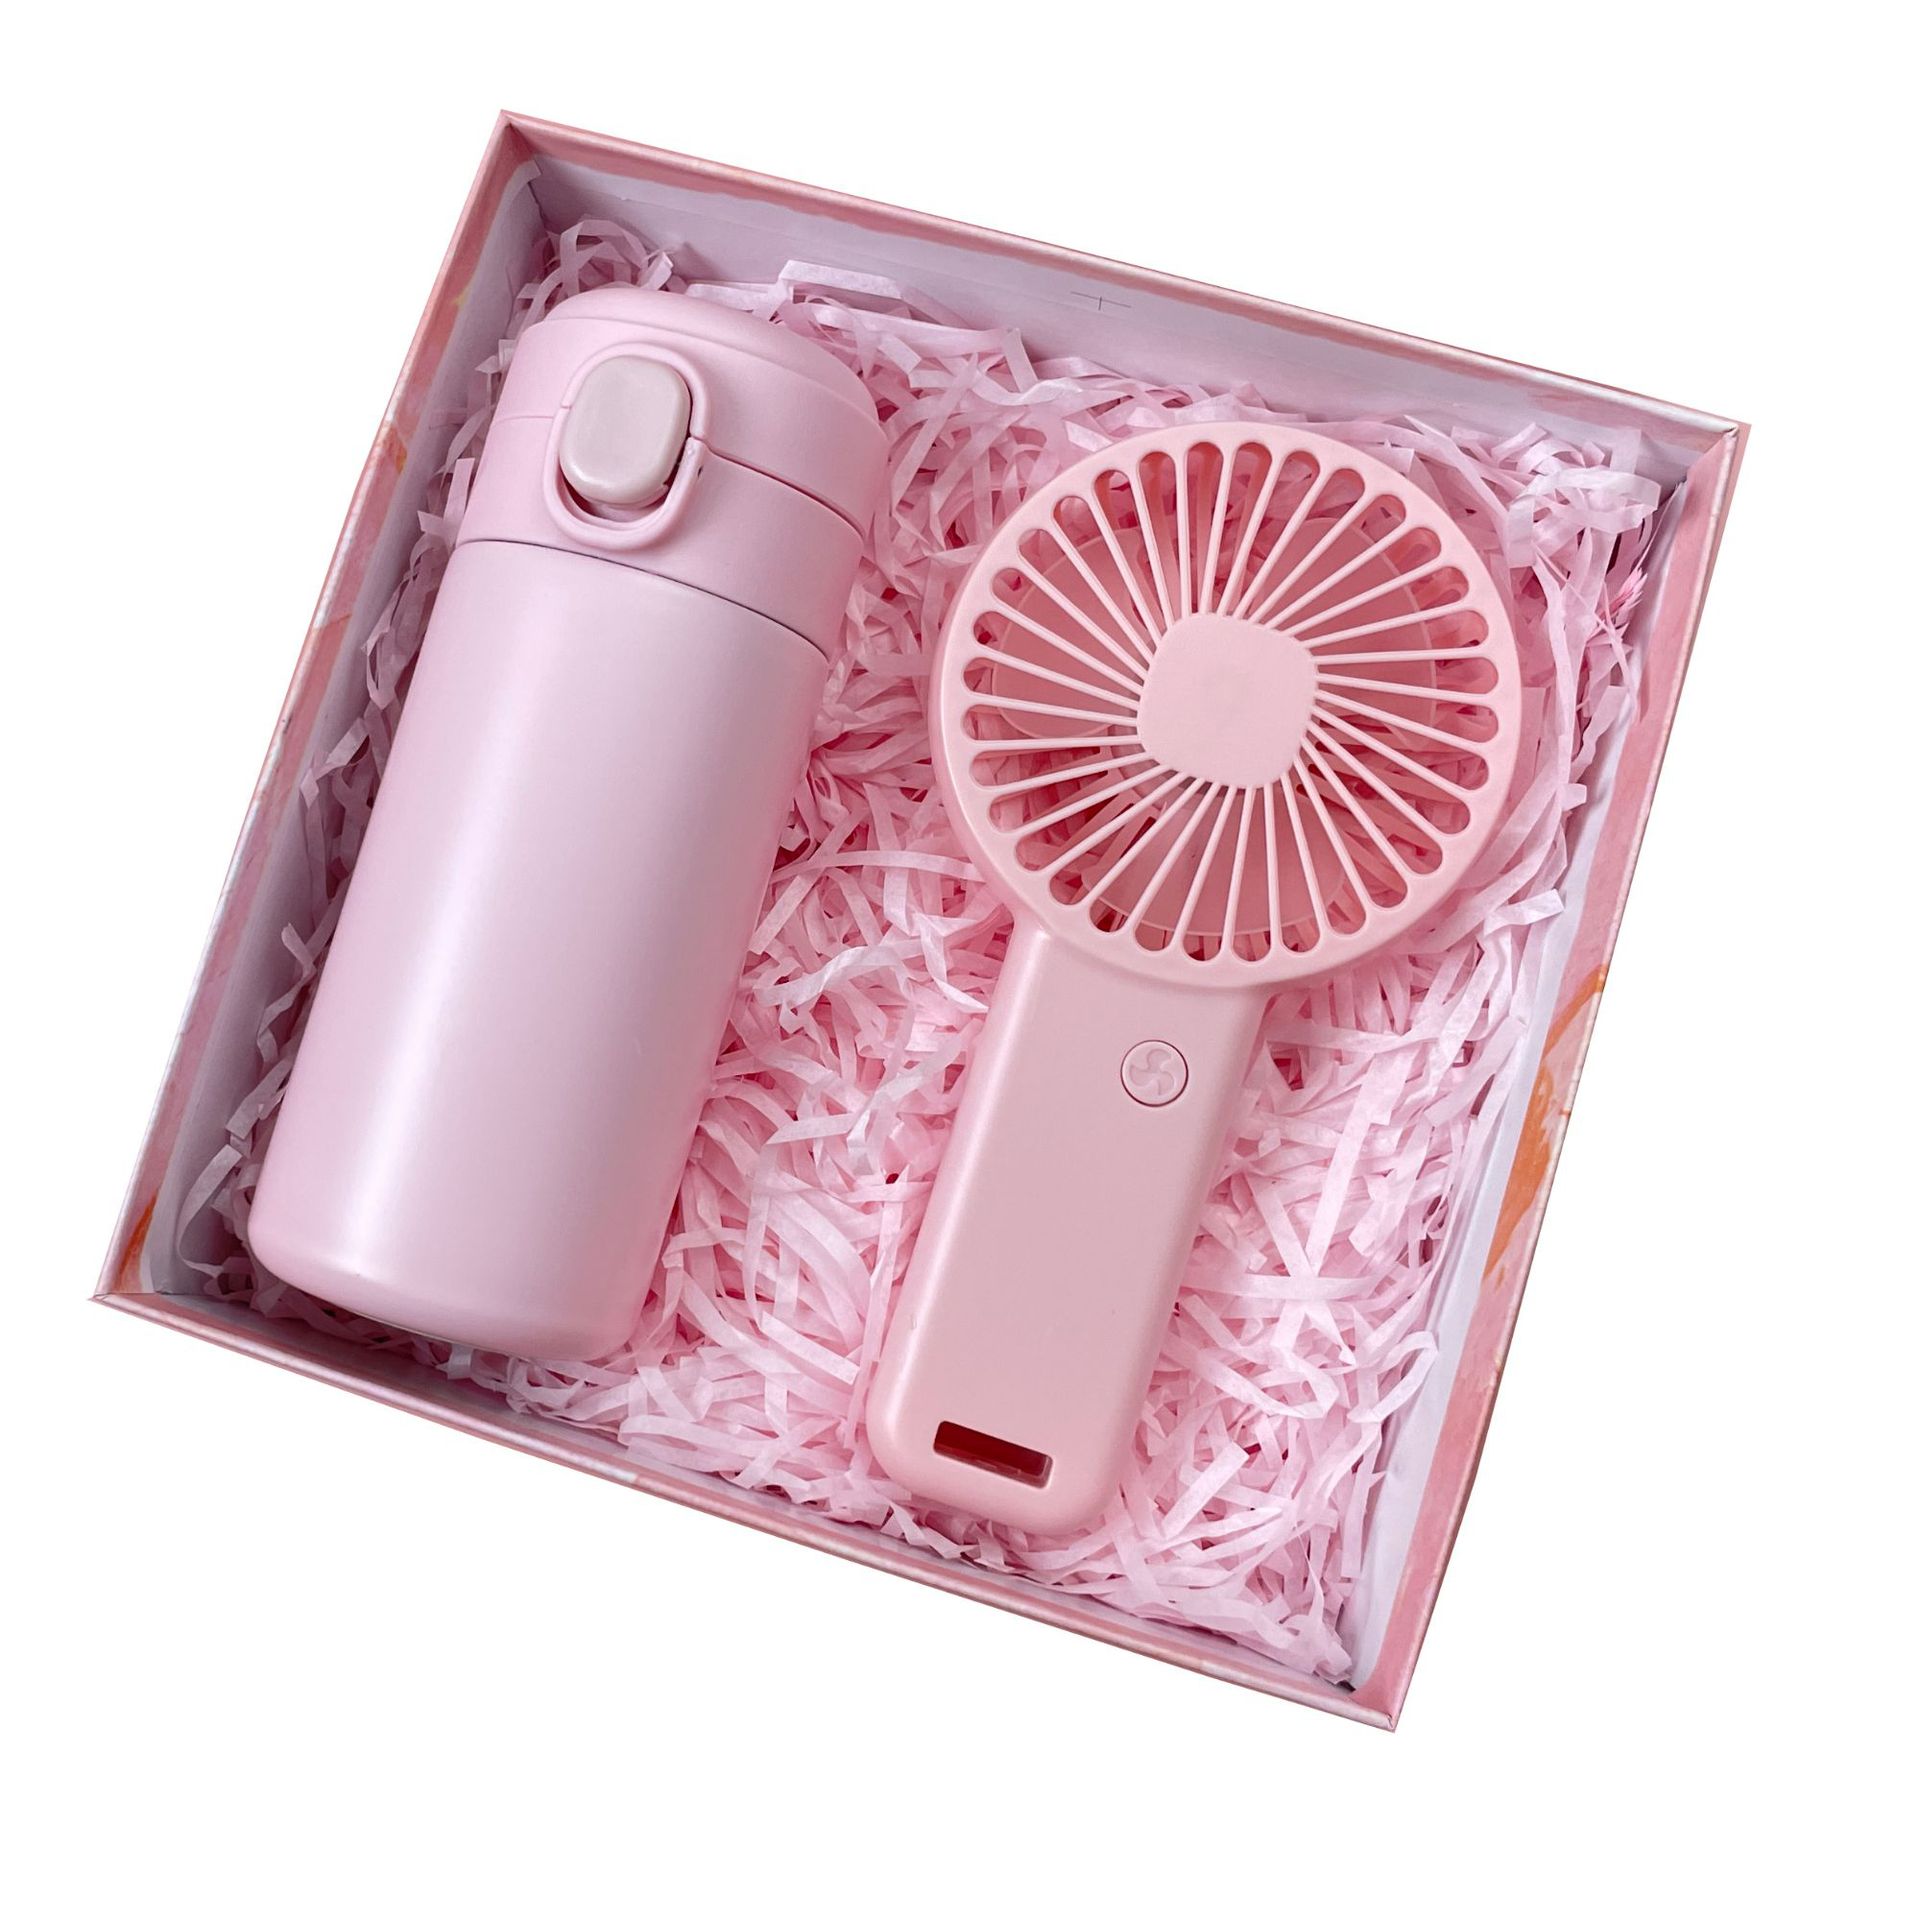 Exquisite Pink Lid and Base Wedding Gift Box for you